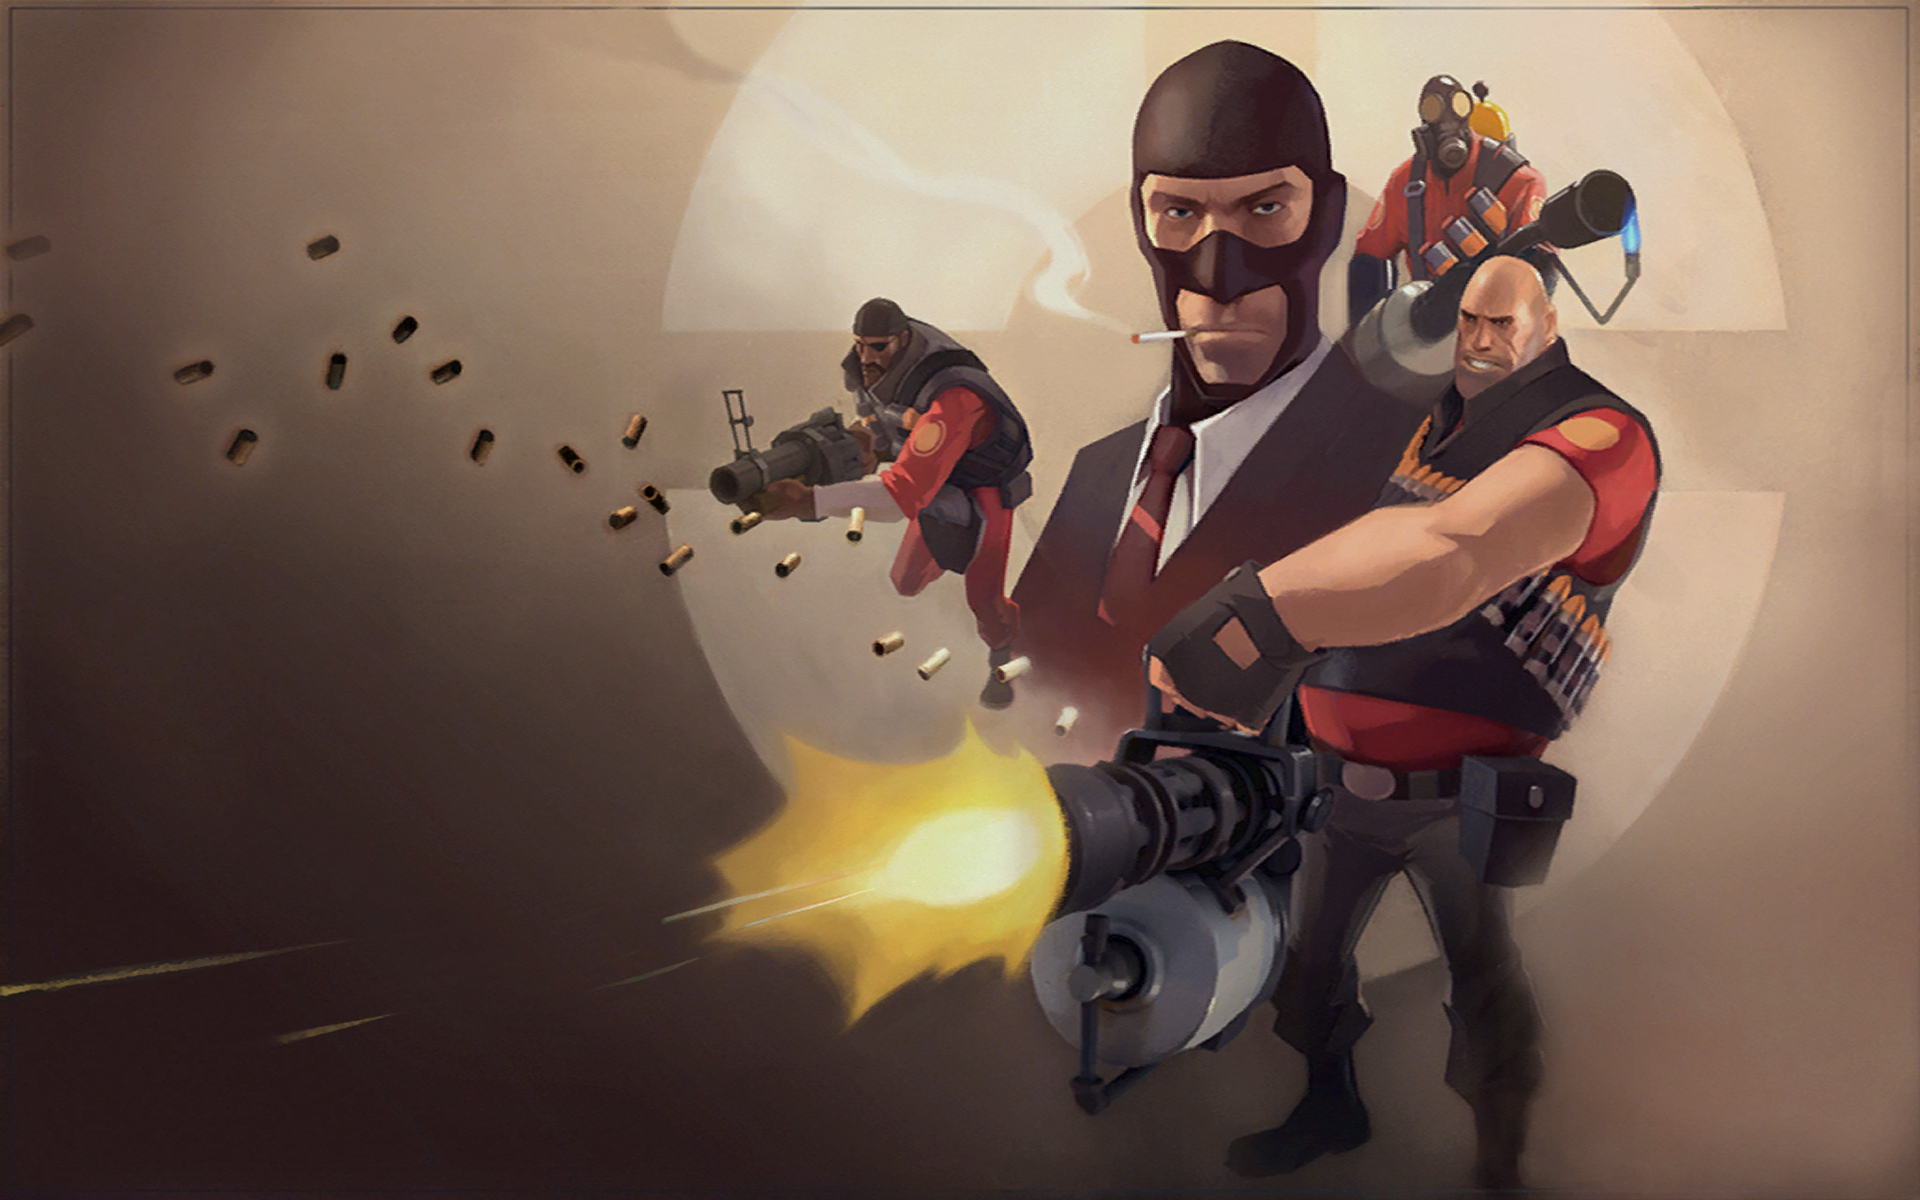 team fortress 2, video game, heavy (team fortress), pyro (team fortress), soldier (team fortress), spy (team fortress), team fortress